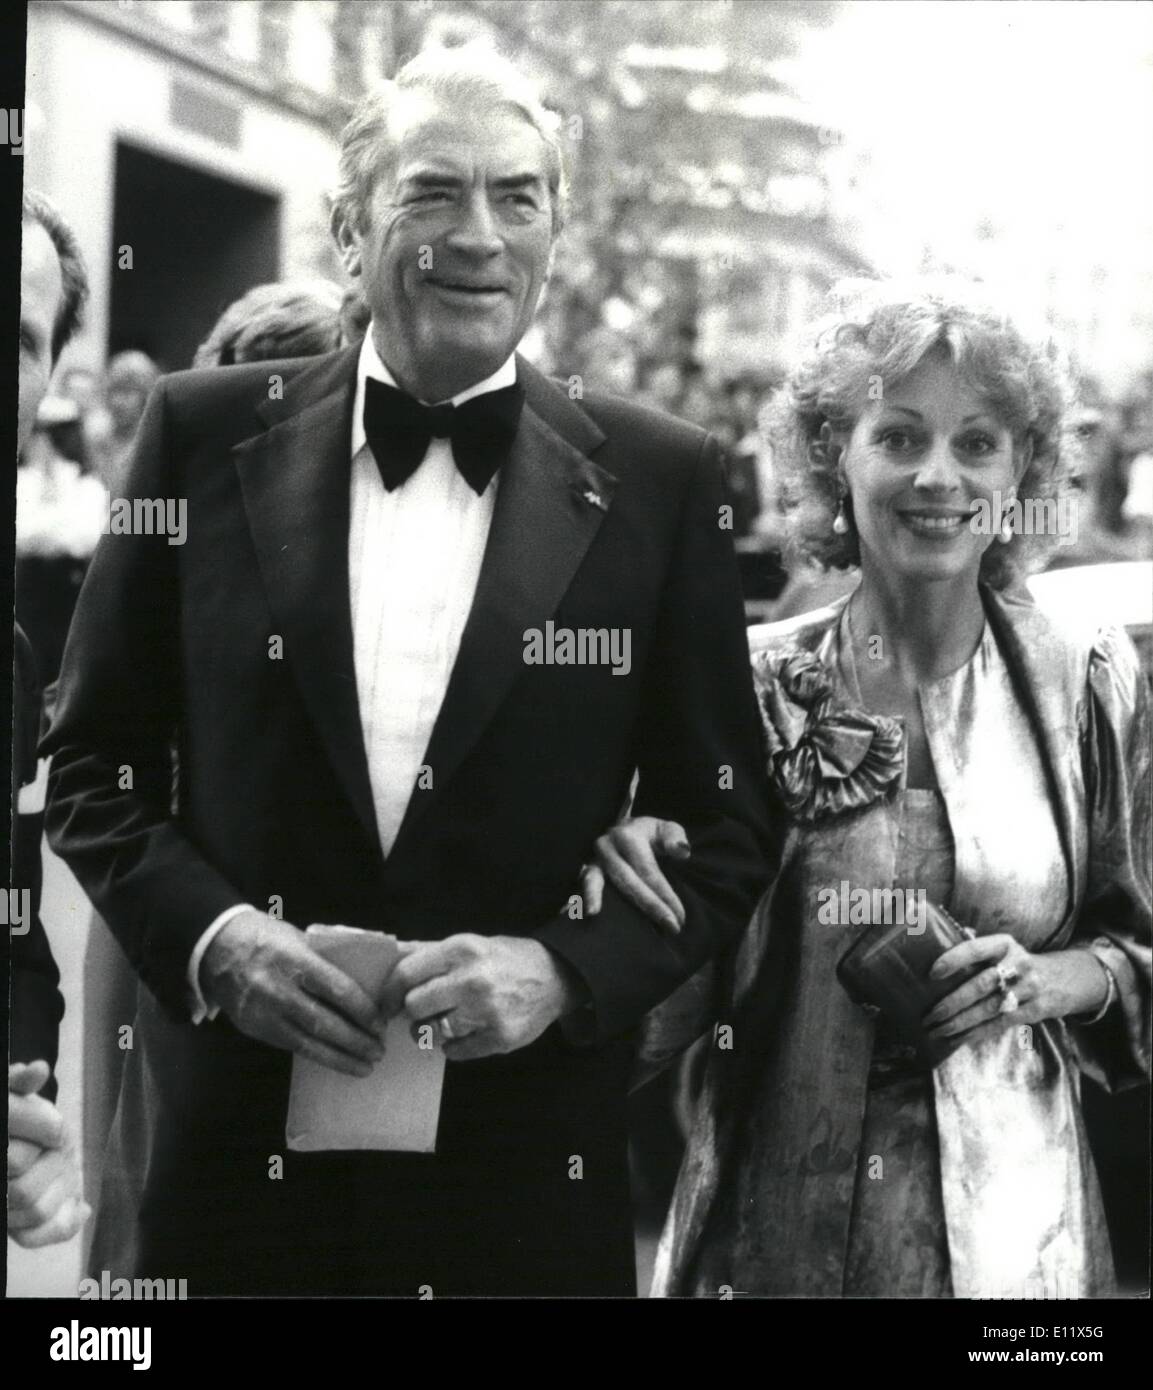 Jul. 04, 1980 - July 4th 1980 The Sea Wolf premiere at the Leicester Square Theatre. The Royal Premiere of the film The Sea Wolf starring Gregory Peck, Roger Moore, Barbara Kellerman, was held in the presence of the Duke and Duchess of Kent last night. Photo Shows: Gregory Peck seen arriving with his wife for the premiere. Stock Photo